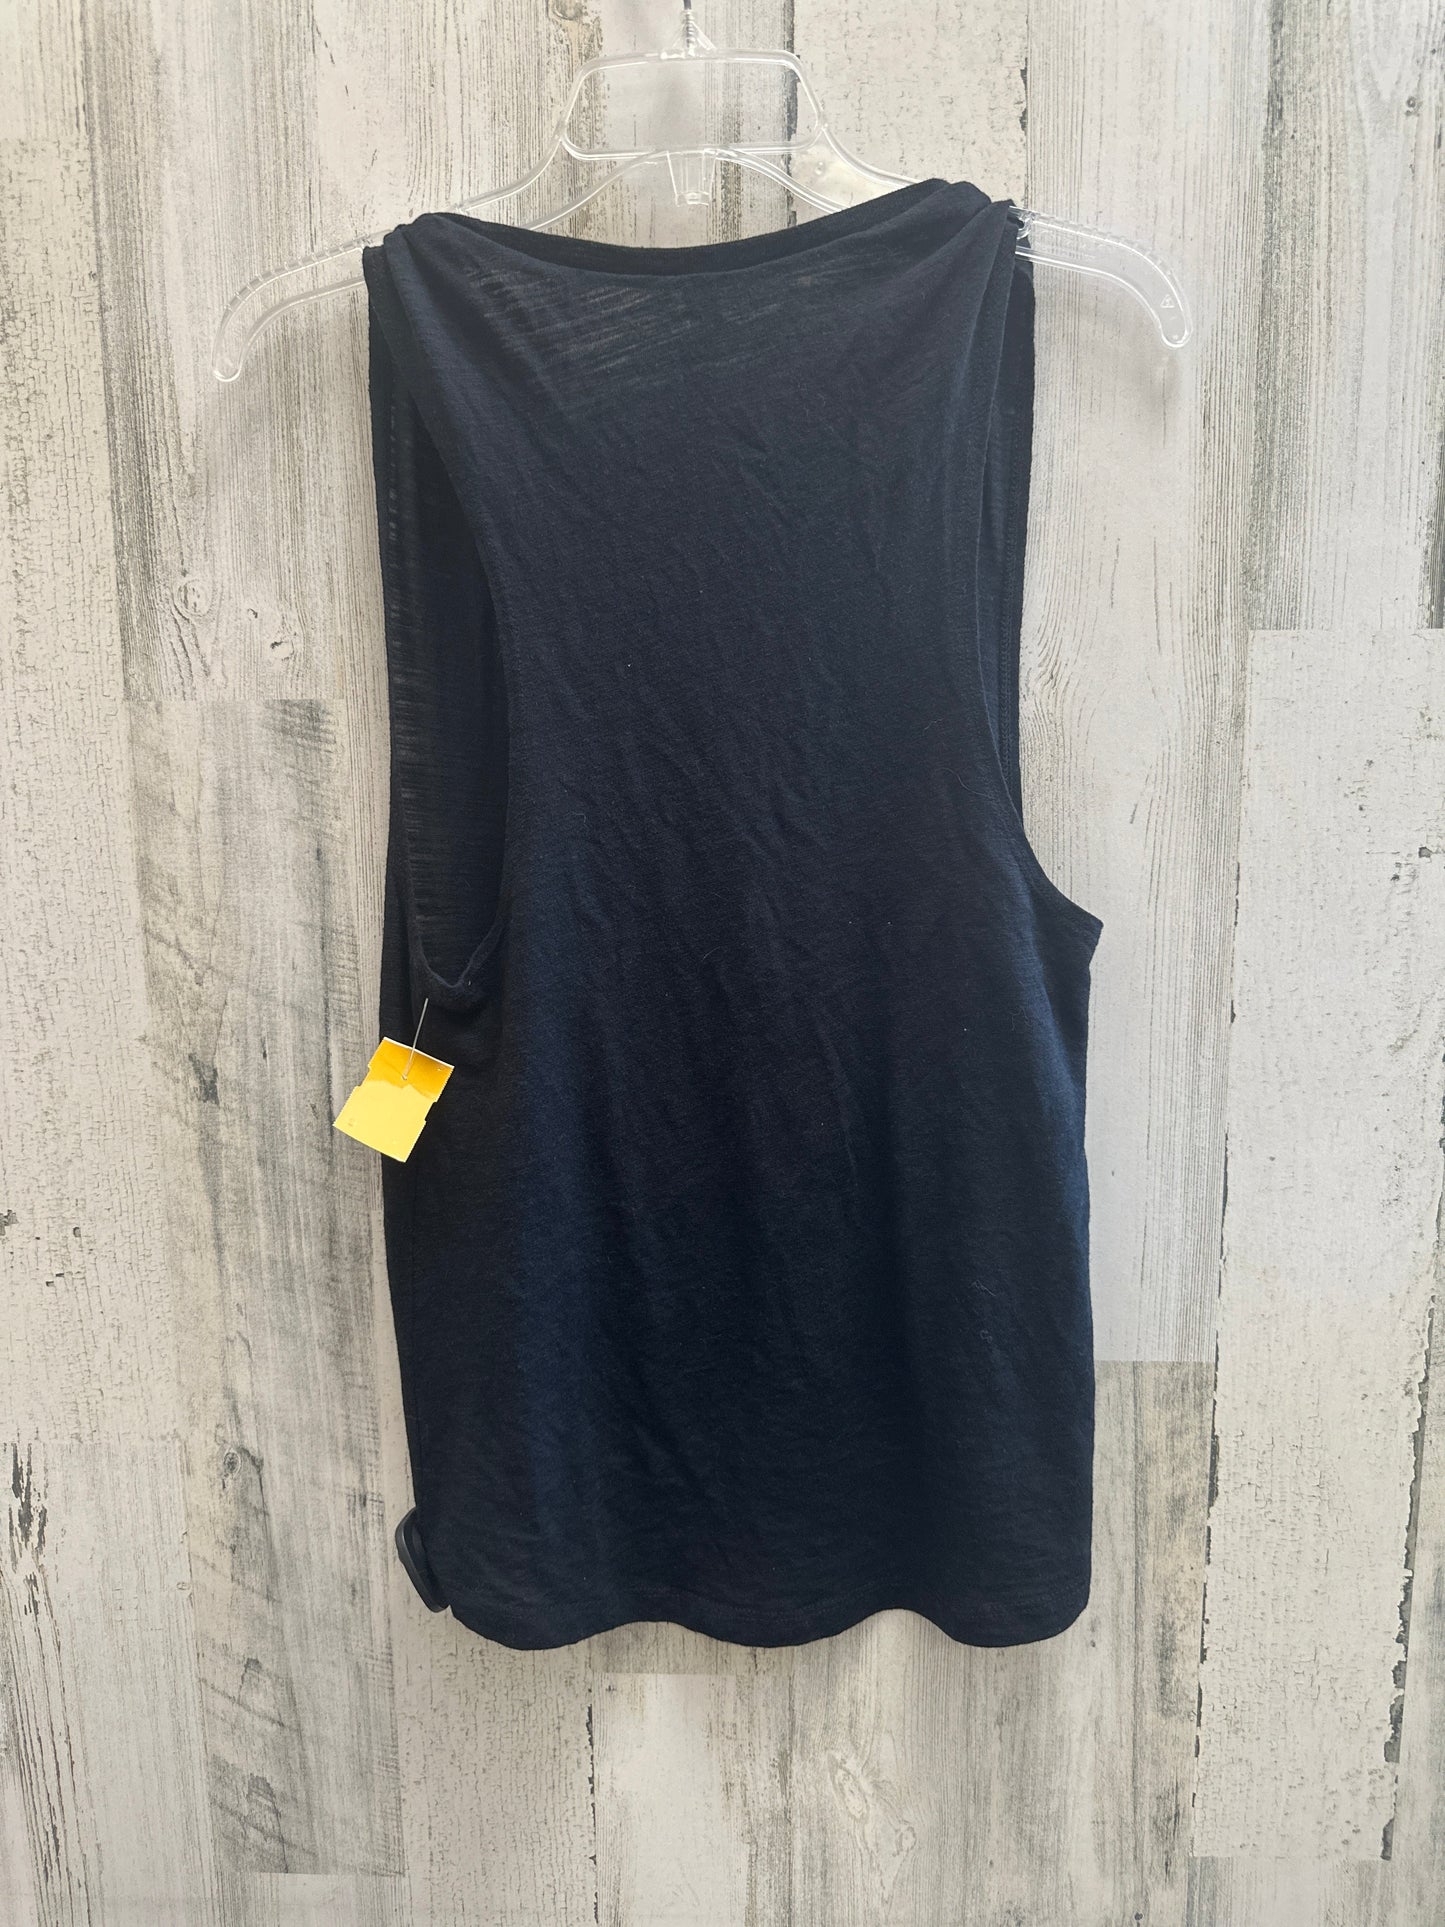 Tank Top By Bella + Canvas  Size: M